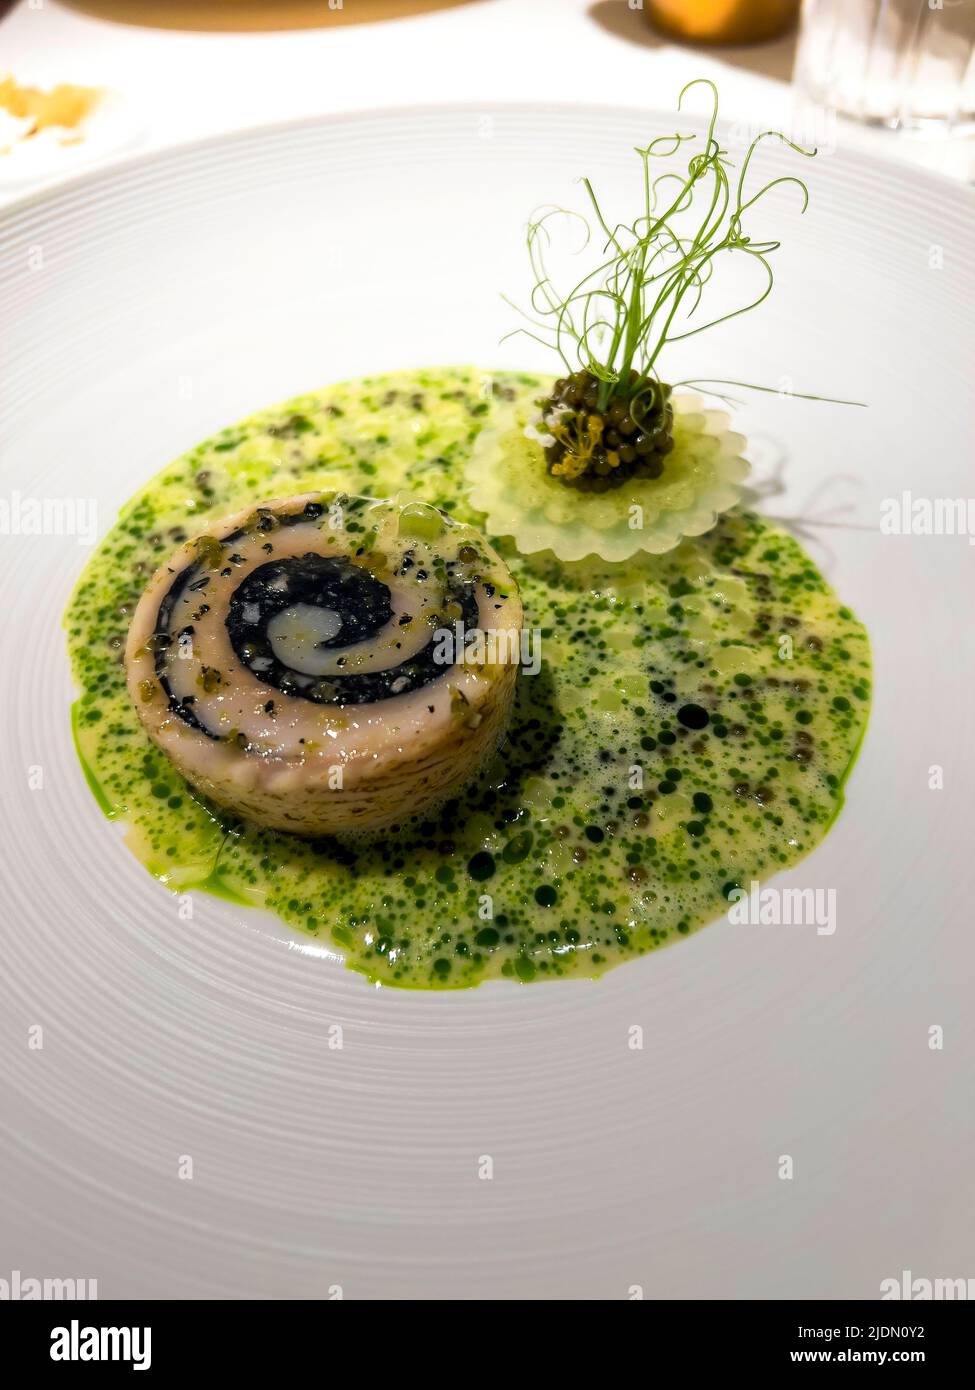 Michelin star restaurant fish course from the taster menu Stock Photo